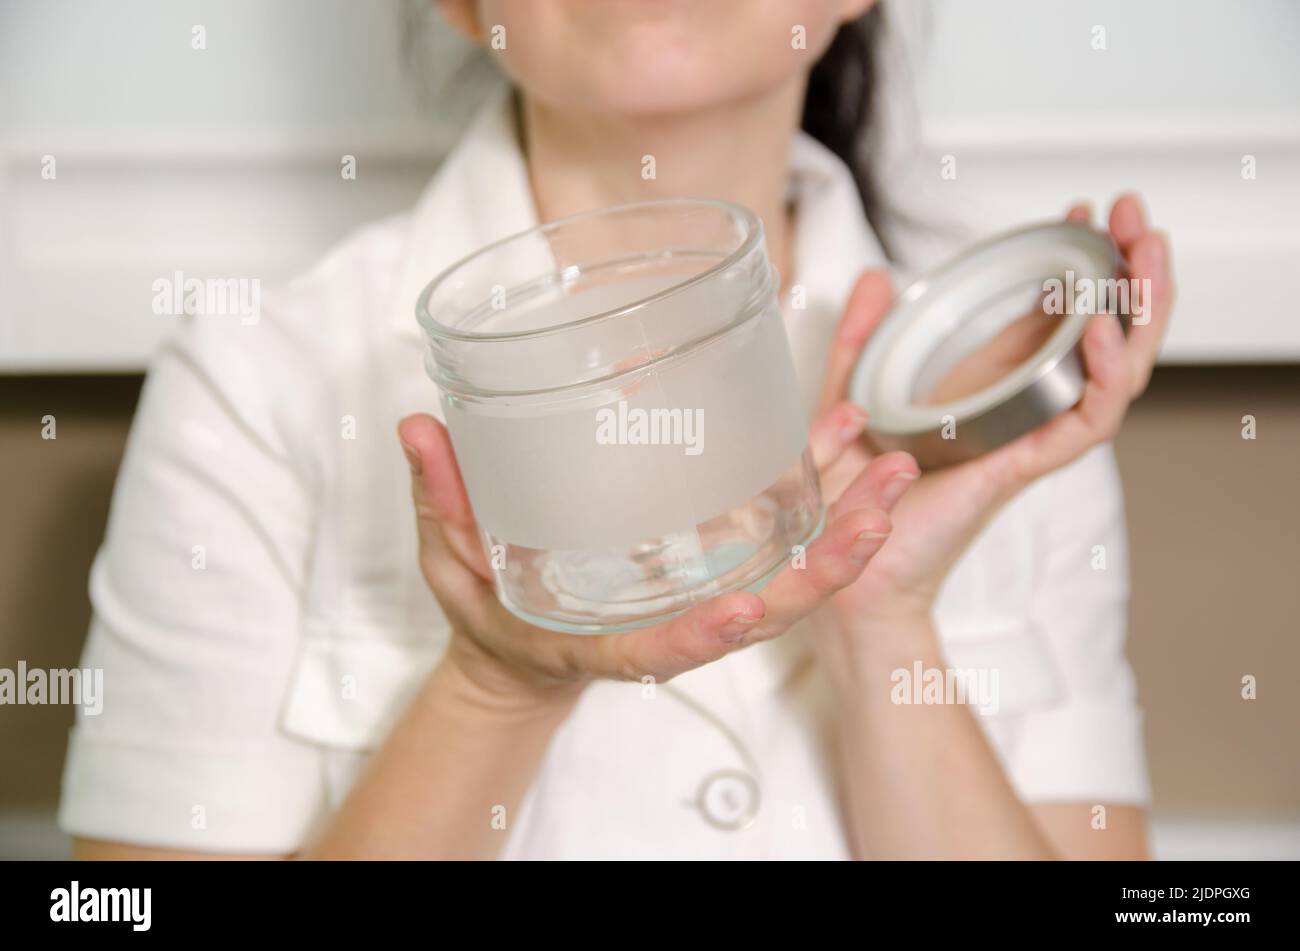 A woman is holding an open empty glass spice jar in her hands Stock Photo